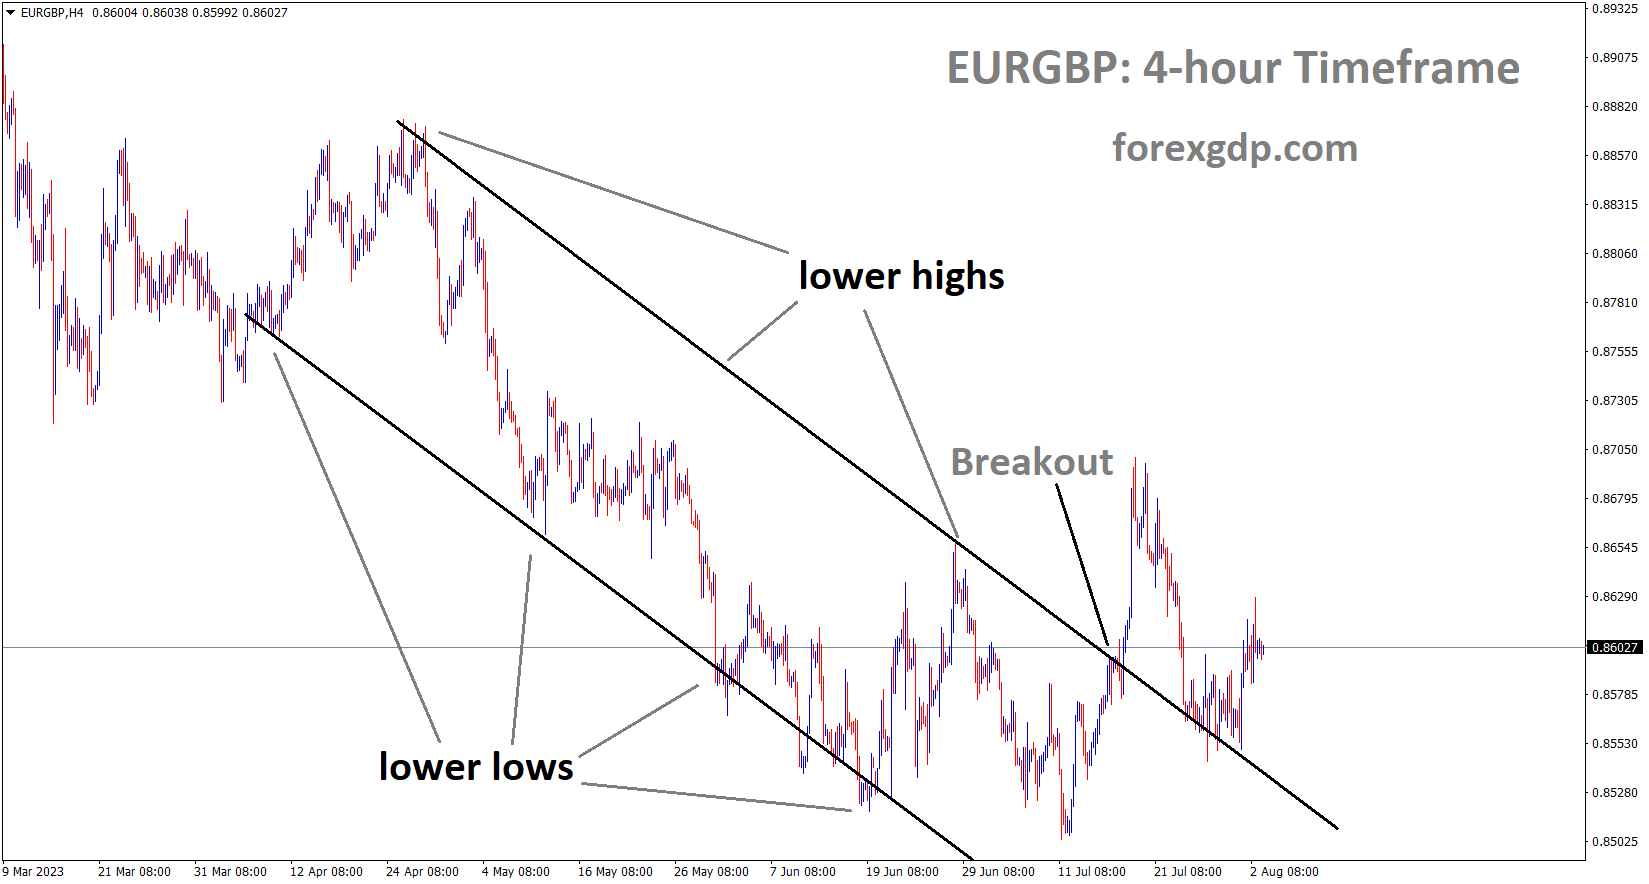 EURGBP has broken the Descending channel and rebounded from the broken area of the channel